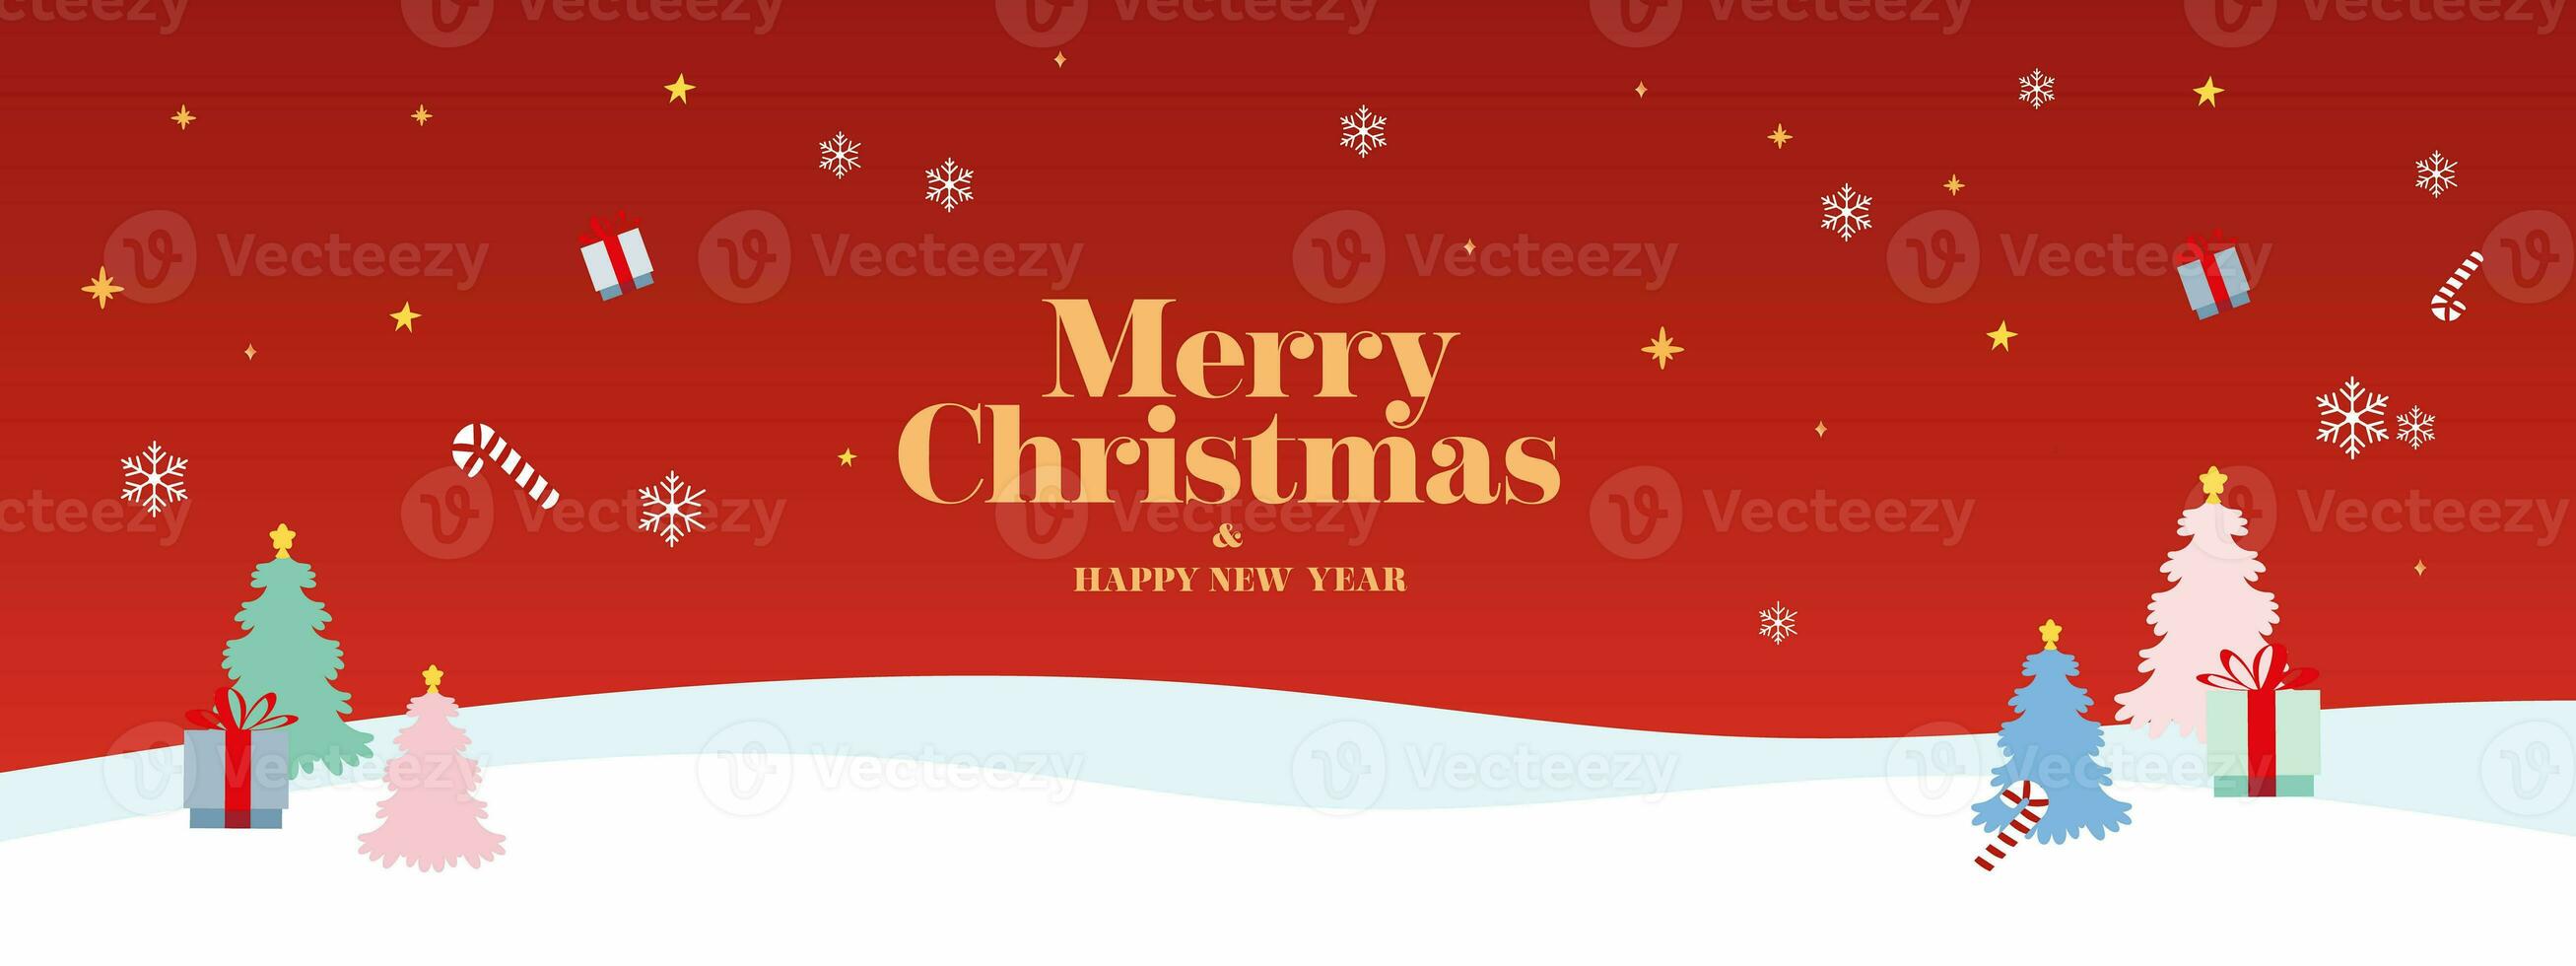 Merry Christmas banner winter landscape background and snow product display photo